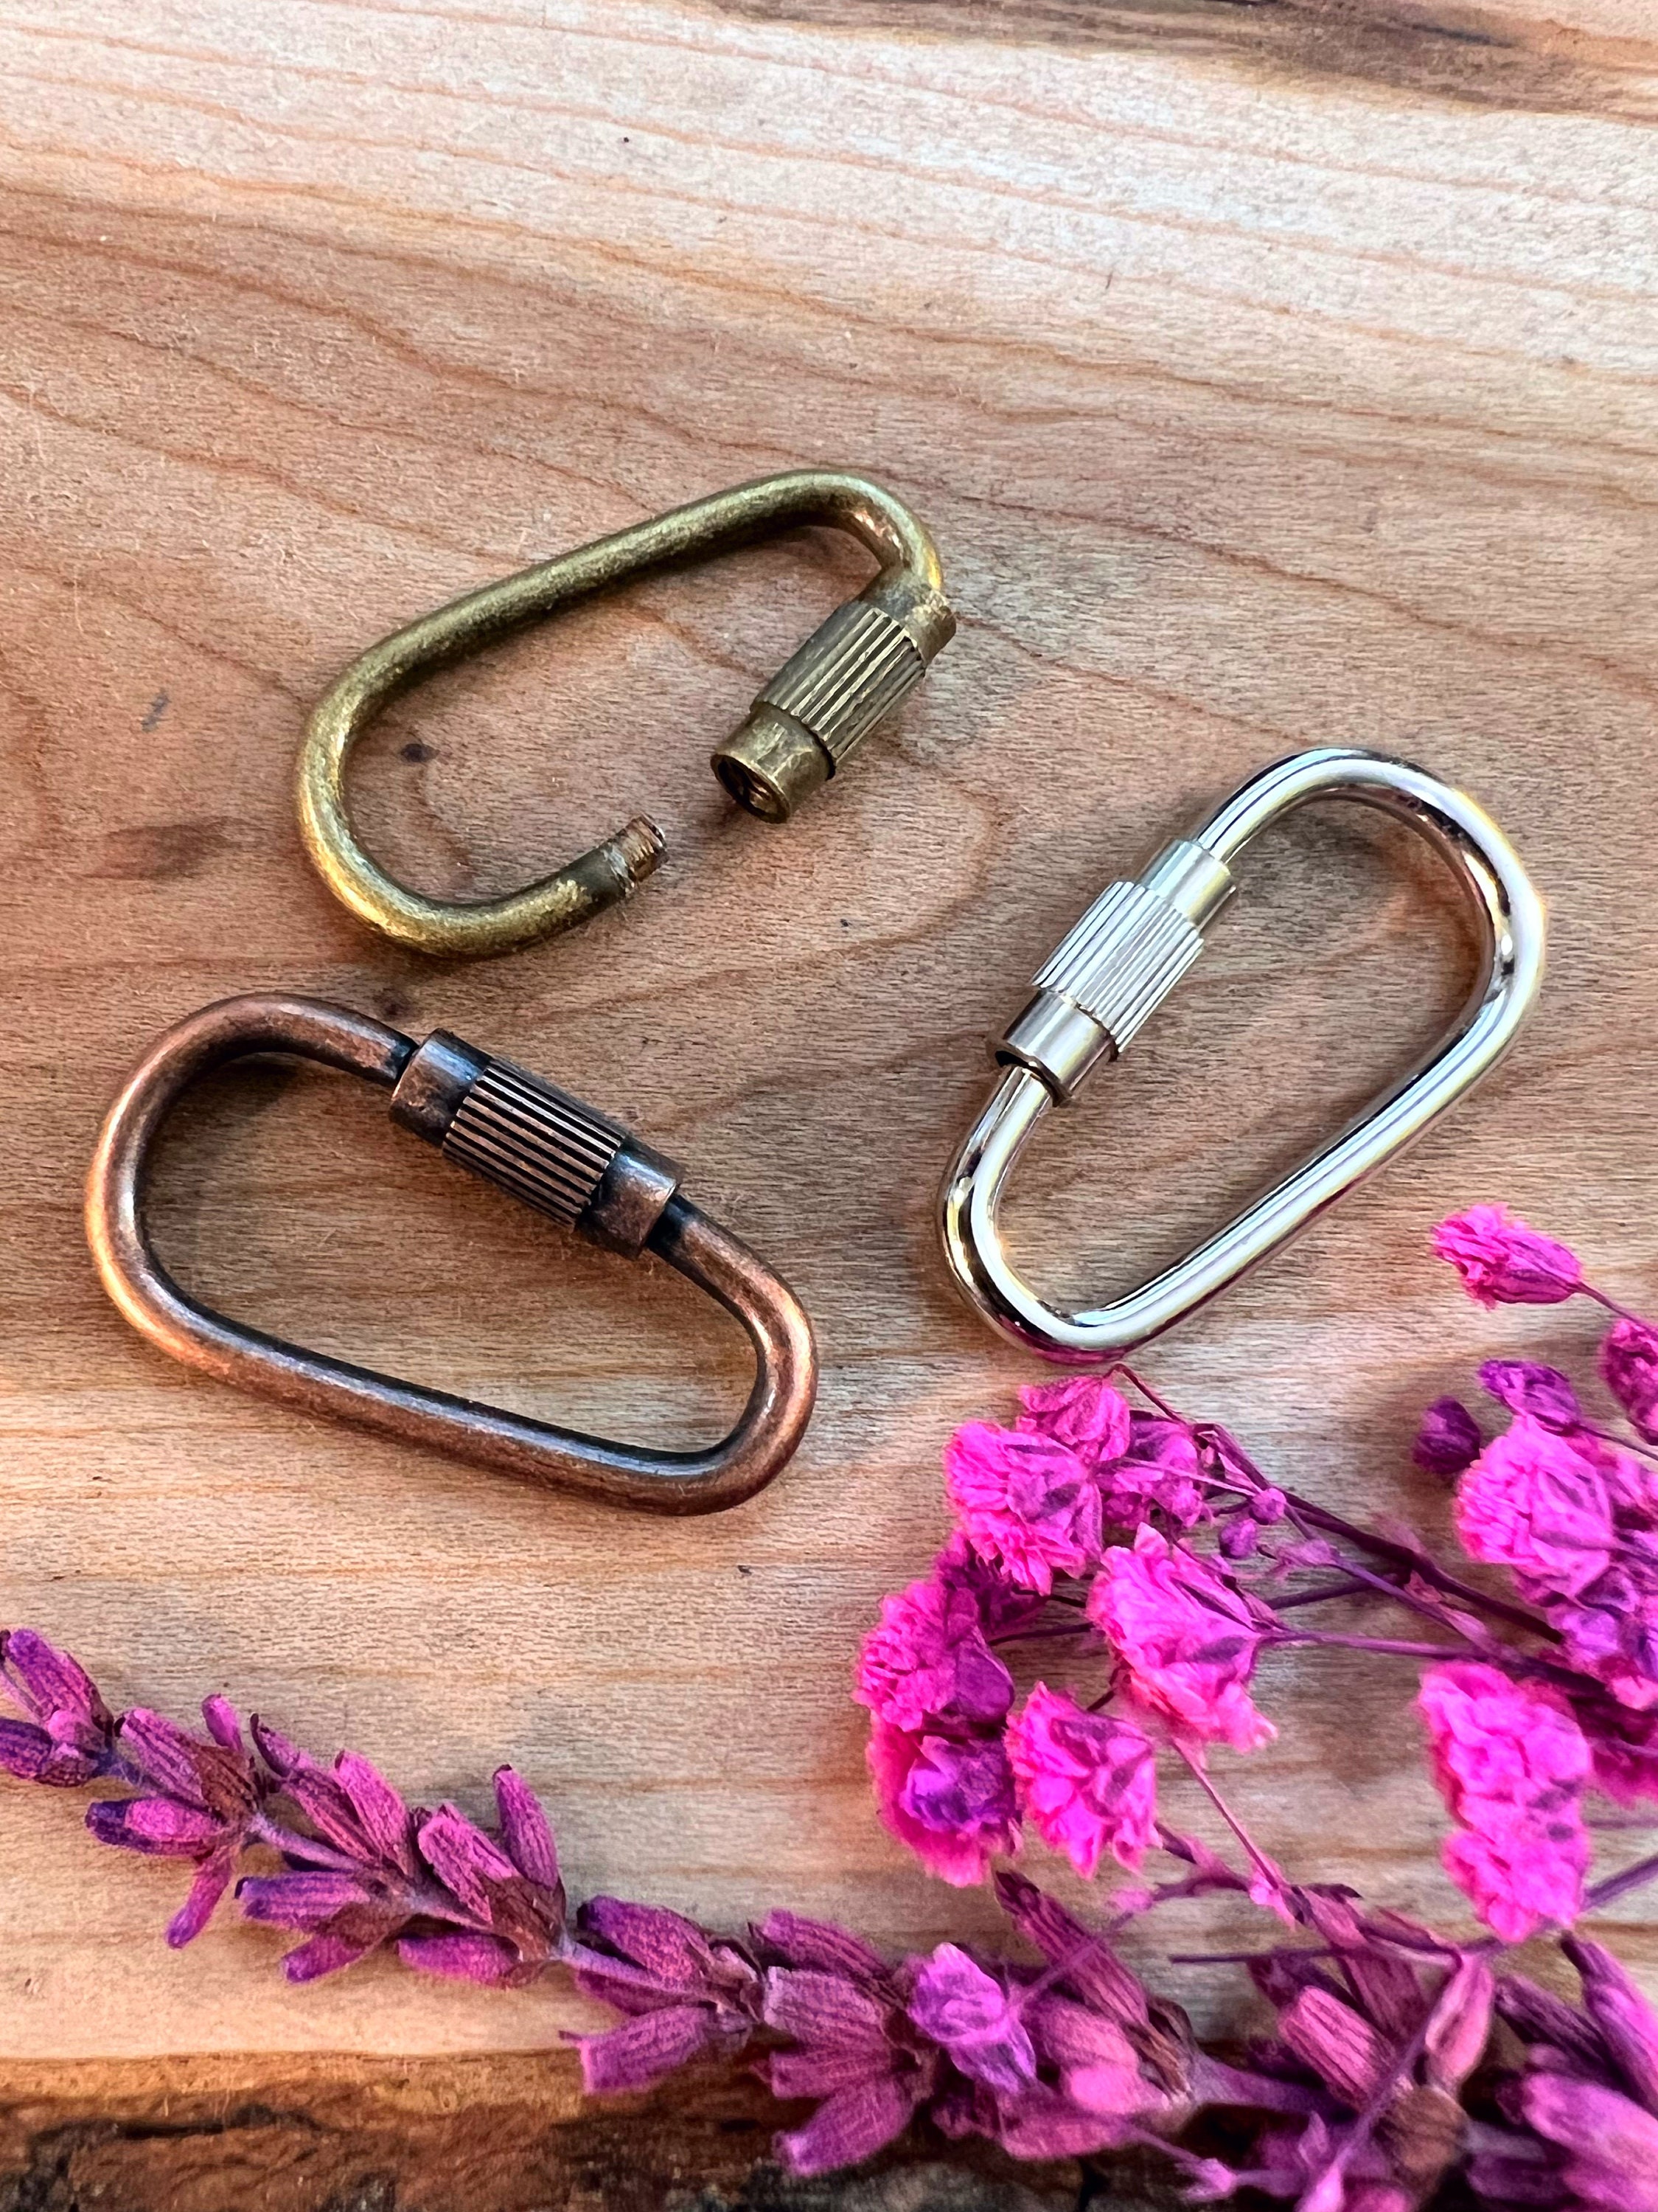 Slopehill Metal Carabiner Keychain Clips, Anti-Rust, Anti-Scratch Keychain Clip Hook, Key Ring Clips Holder Organizer for Car Key Finder, Adult Unisex